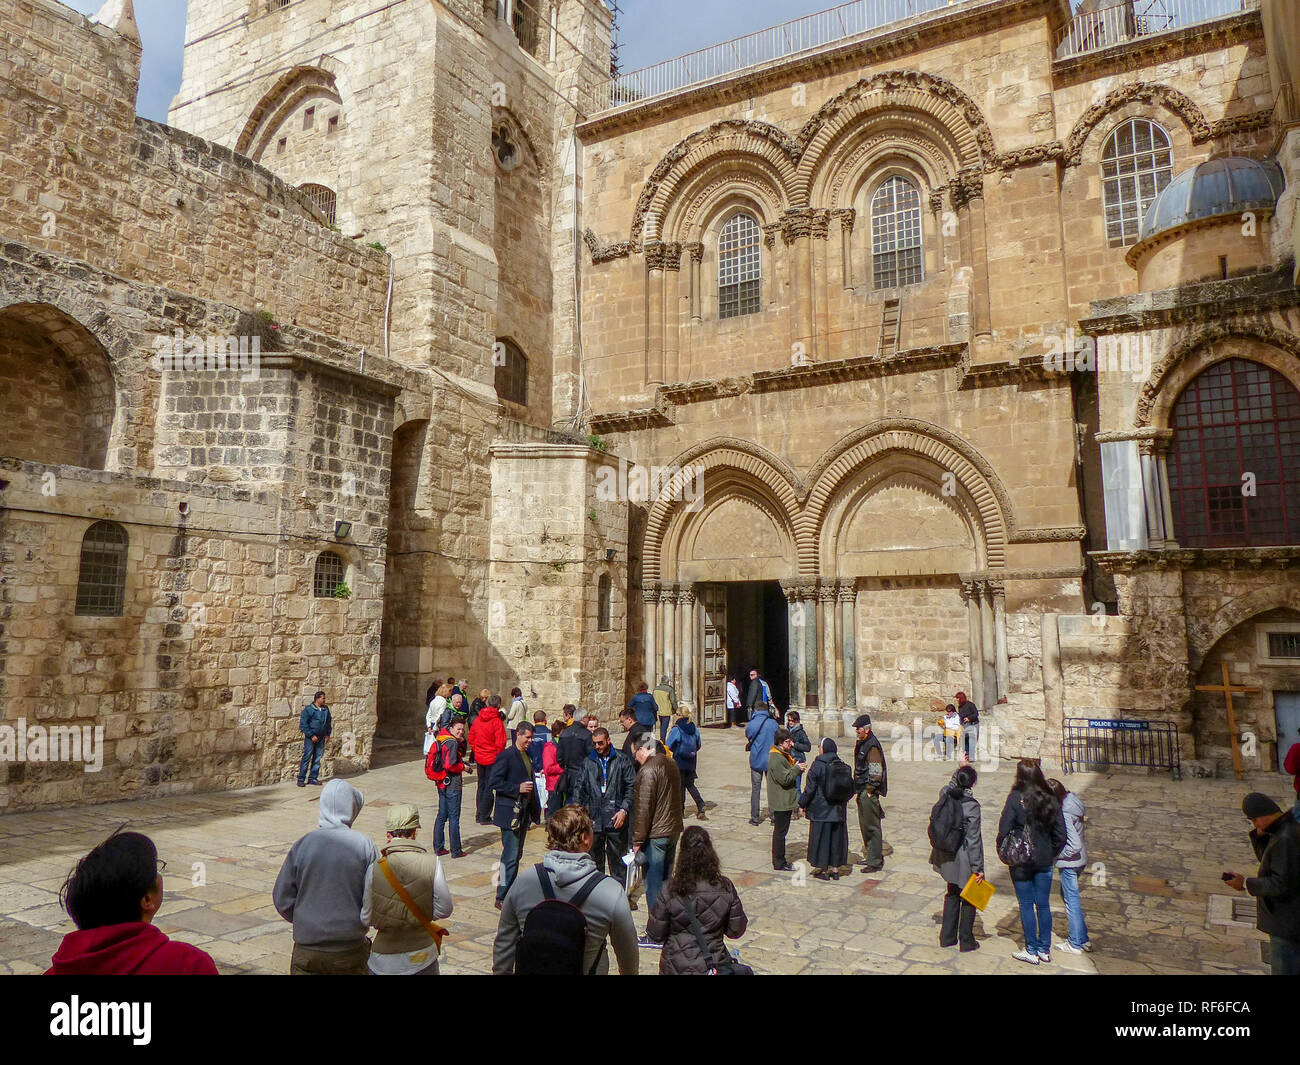 Exterior of the church of the Holy Sepulchre, Old city, Jerusalem, Israel. The main entrance Stock Photo